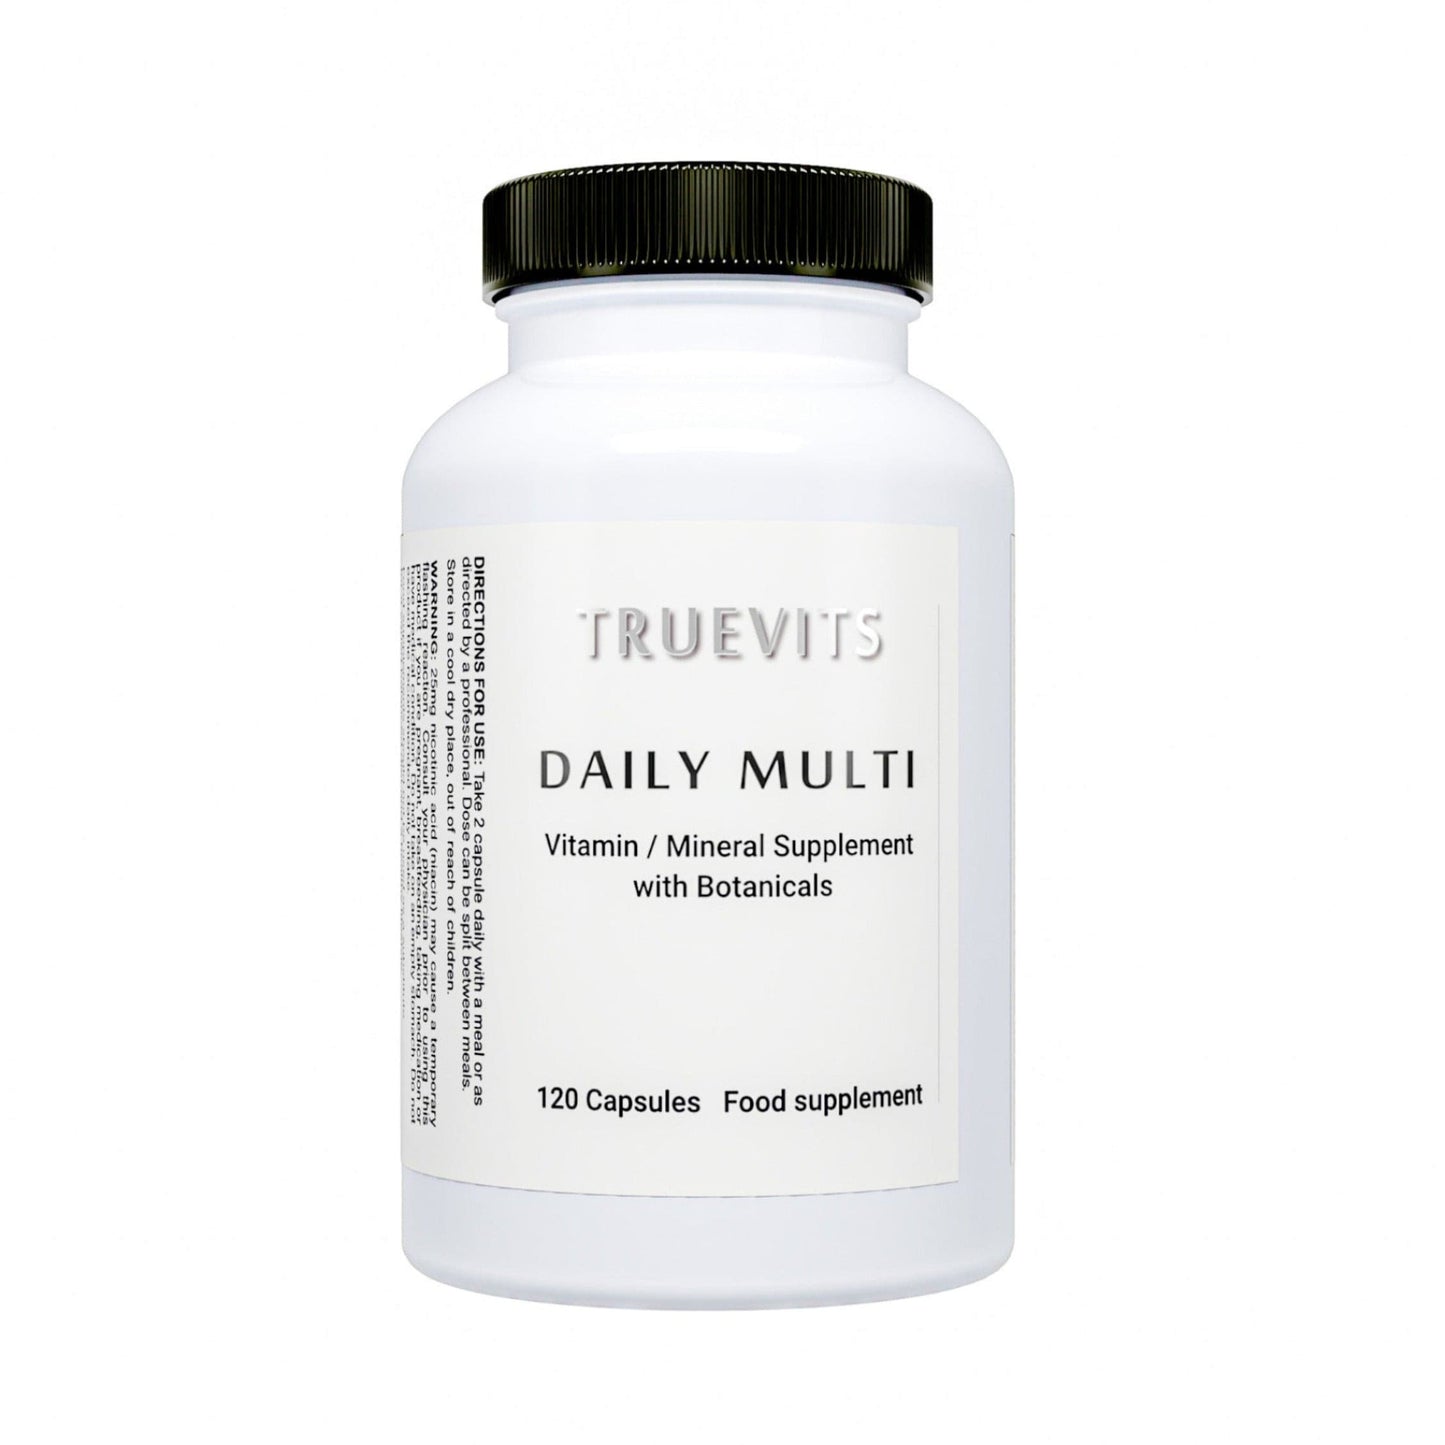 TRUEVITS-Daily-Multi-vitamin-mineral-supplement-with-botanicals